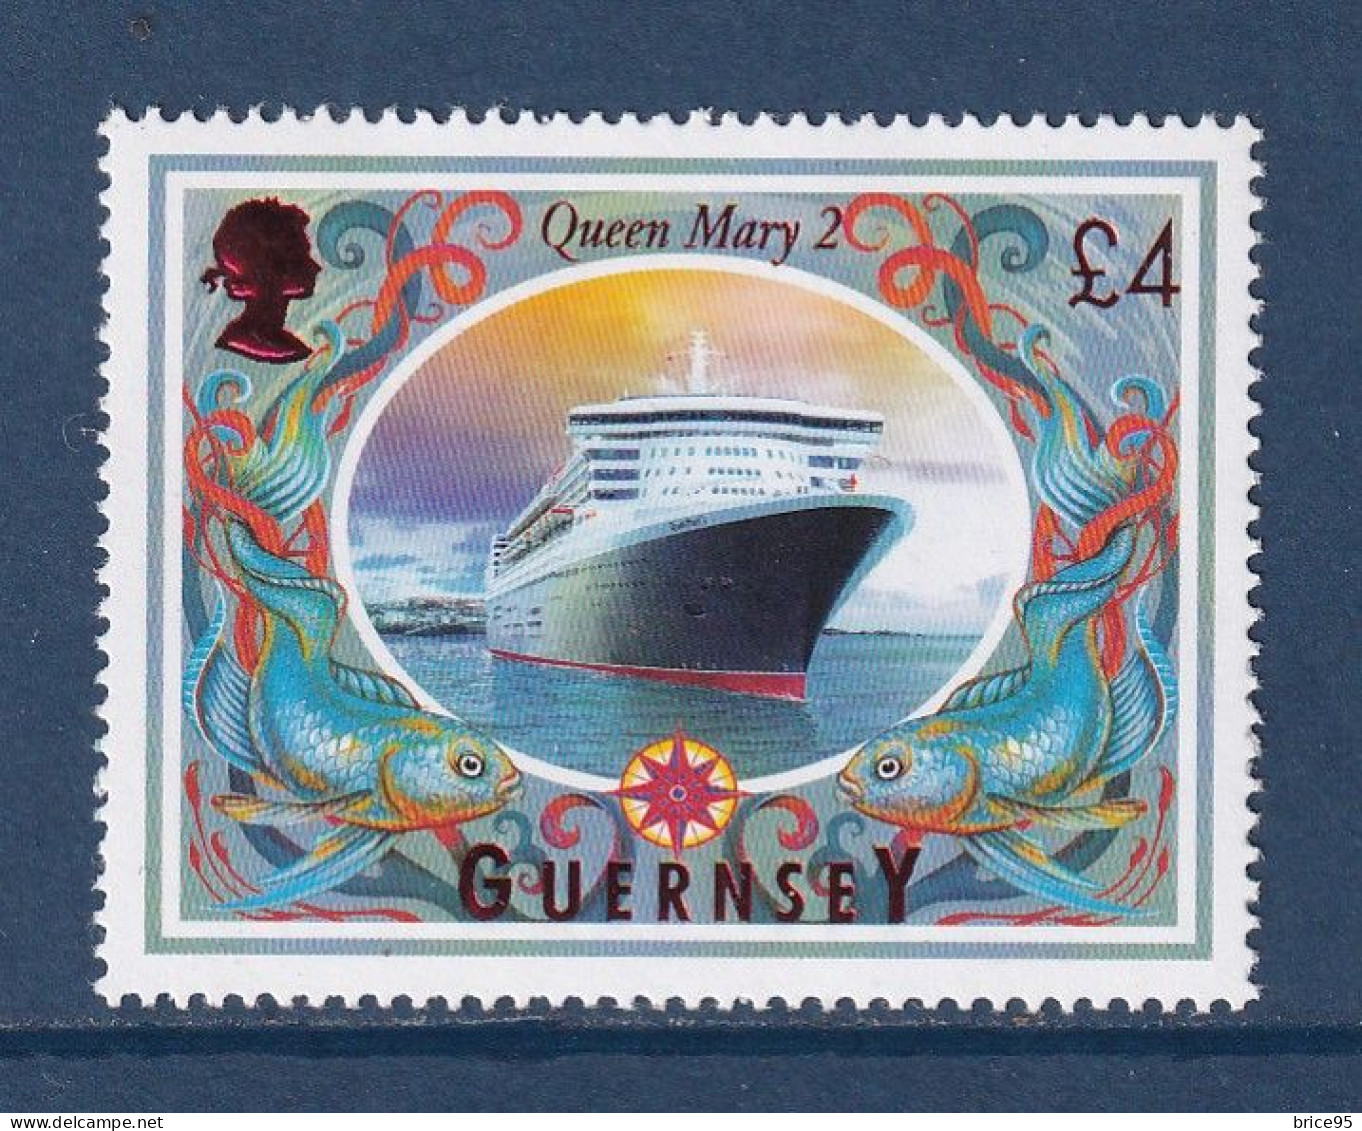 Guernesey - YT N° 1062 ** - Neuf Sans Charnière - 2005 - Guernsey